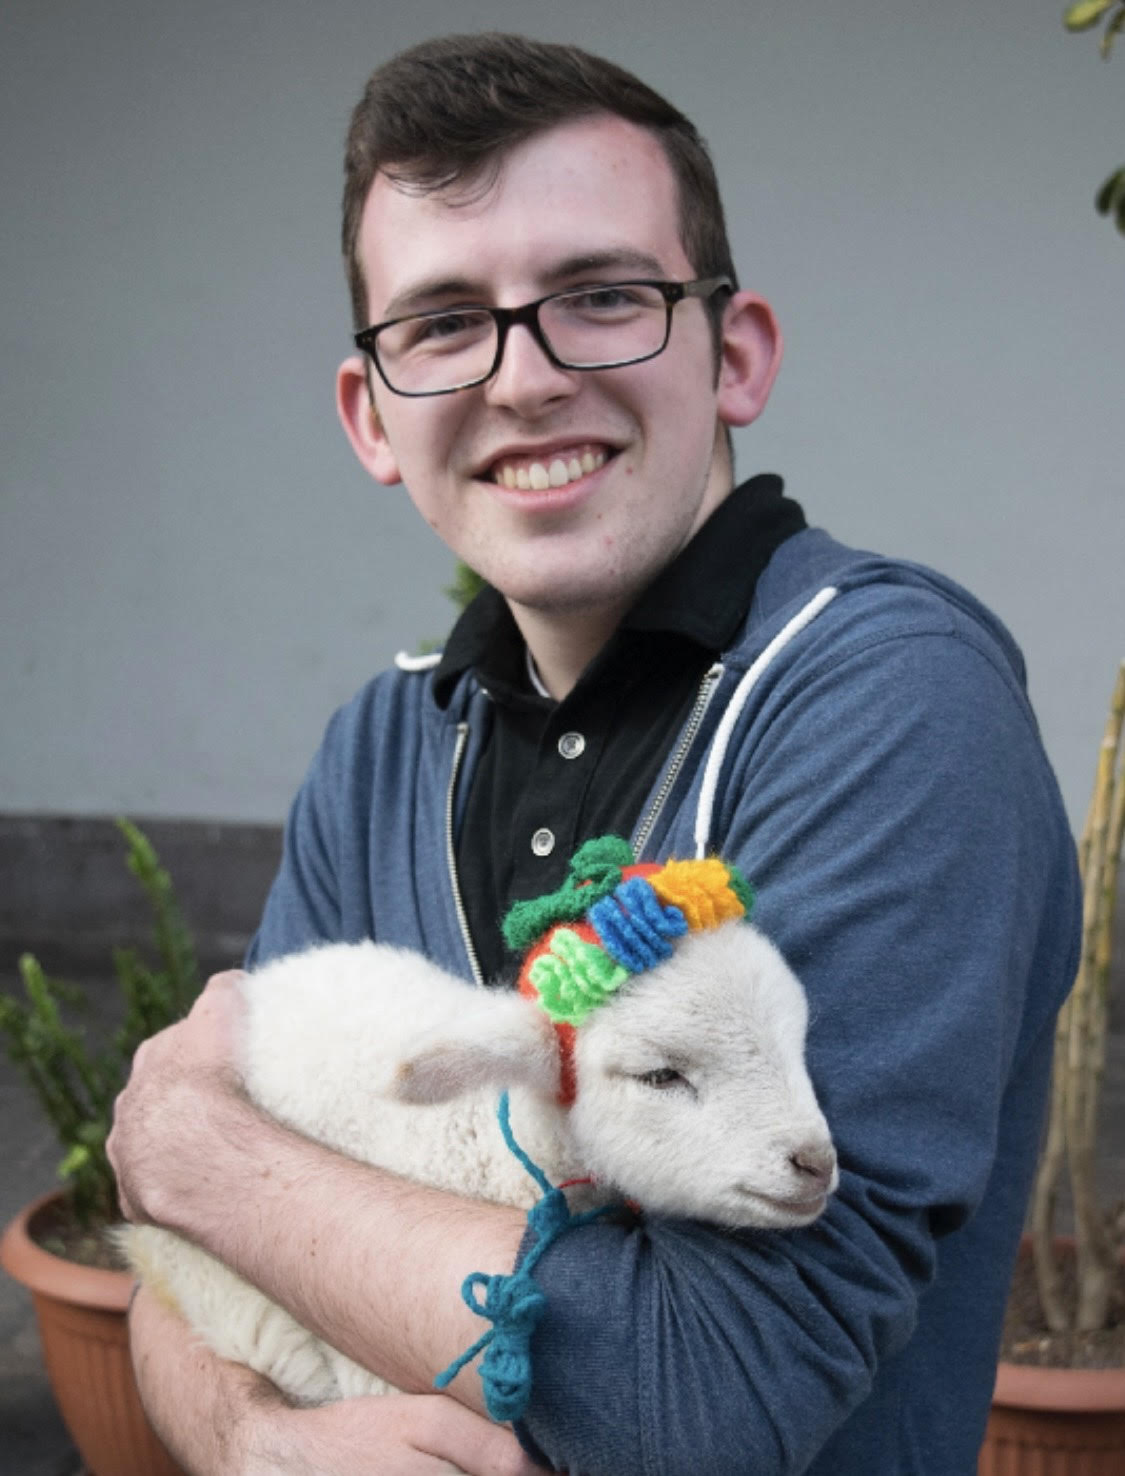 William, smiling, holds a lamb on a street in Peru. The lamb is wearing a knitted hat.